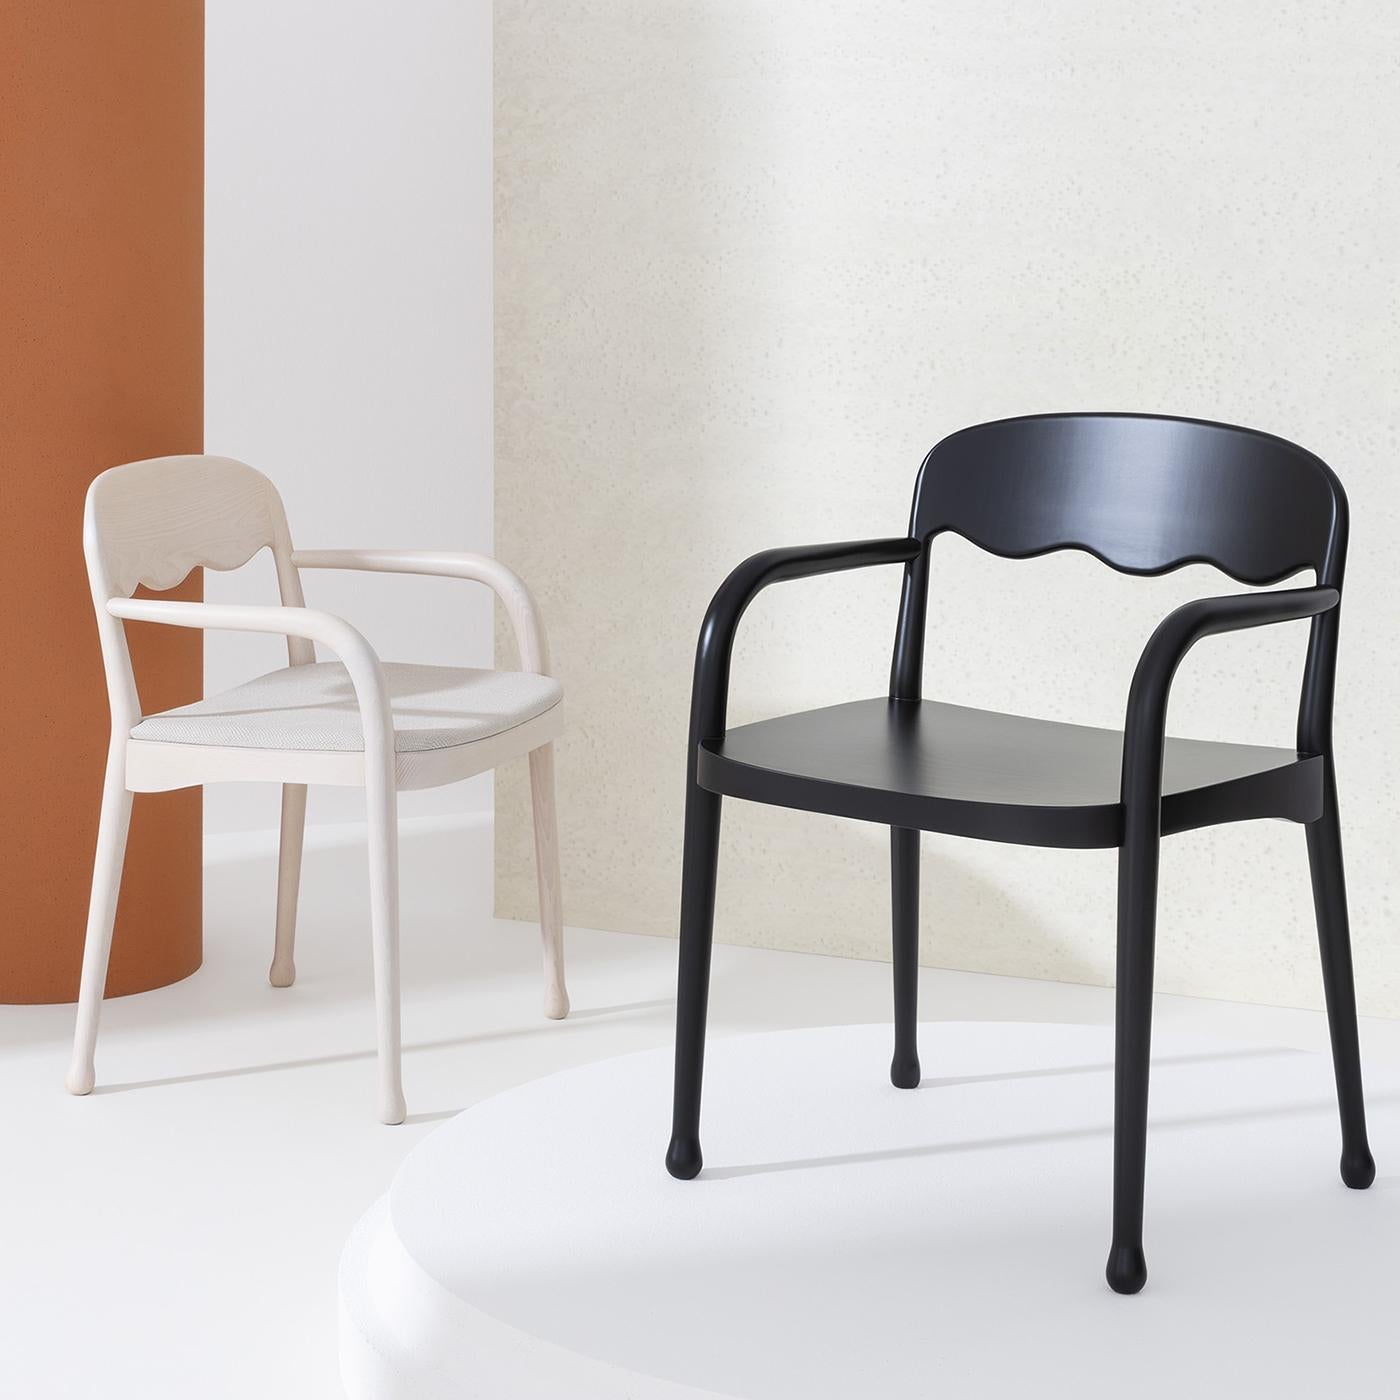 Boasting a total-black look with a matte finish, this armchair is a refined design by Cristina Celestino. Crafted of beechwood, its ergonomic seat rests on four slightly slanted legs completed with round feet and felt pads, and is embellished with a